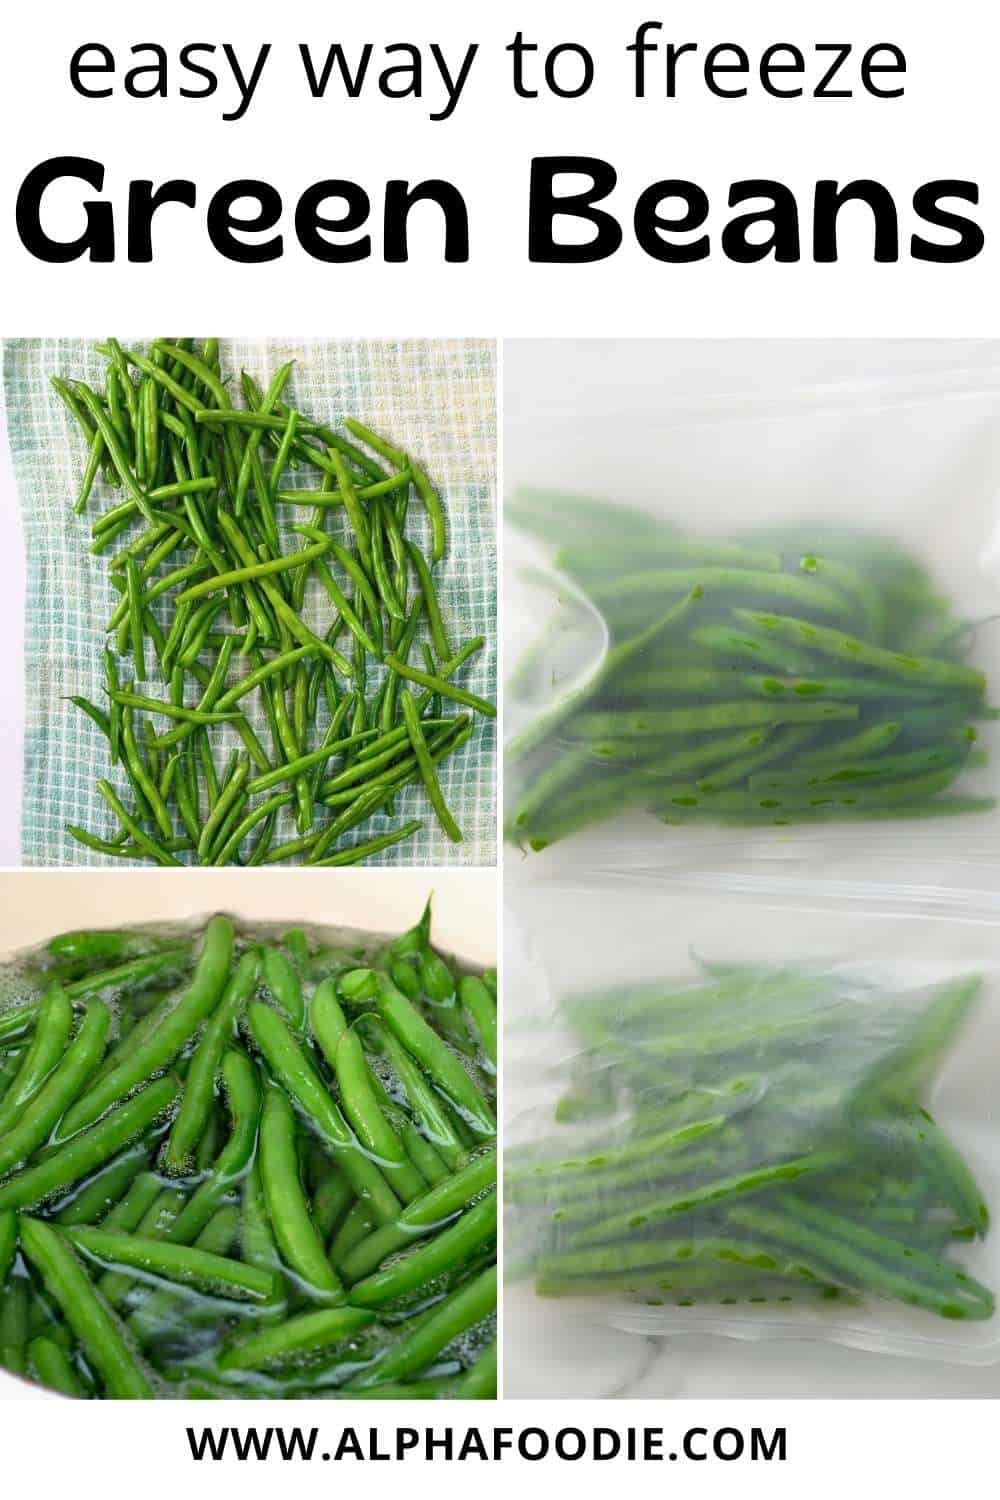 How to Freeze Green Beans - The Complete Guide - Alphafoodie